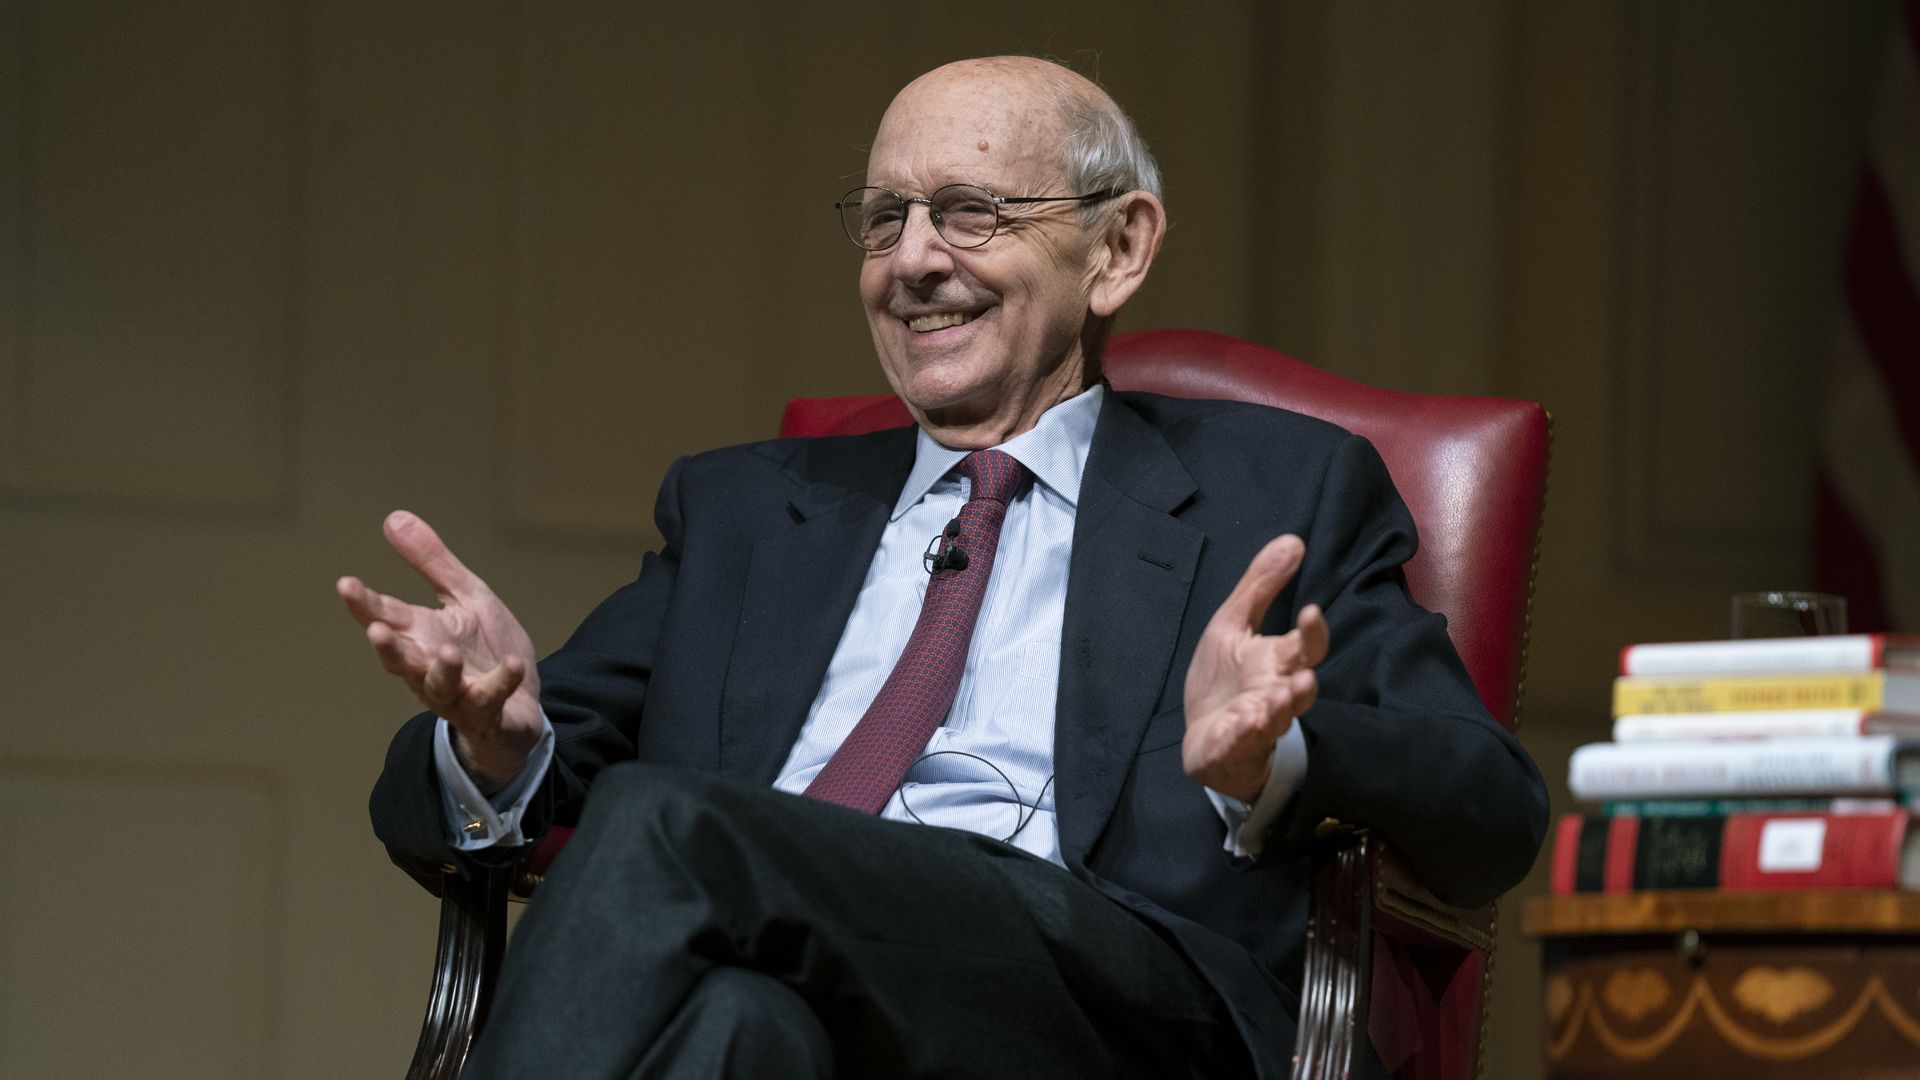 Supreme Court Justice Stephen Breyer speaks during an event at the Library of Congress for the 2022 Supreme Court Fellows Program hosted by the Law Library of Congress on February 17, 2022